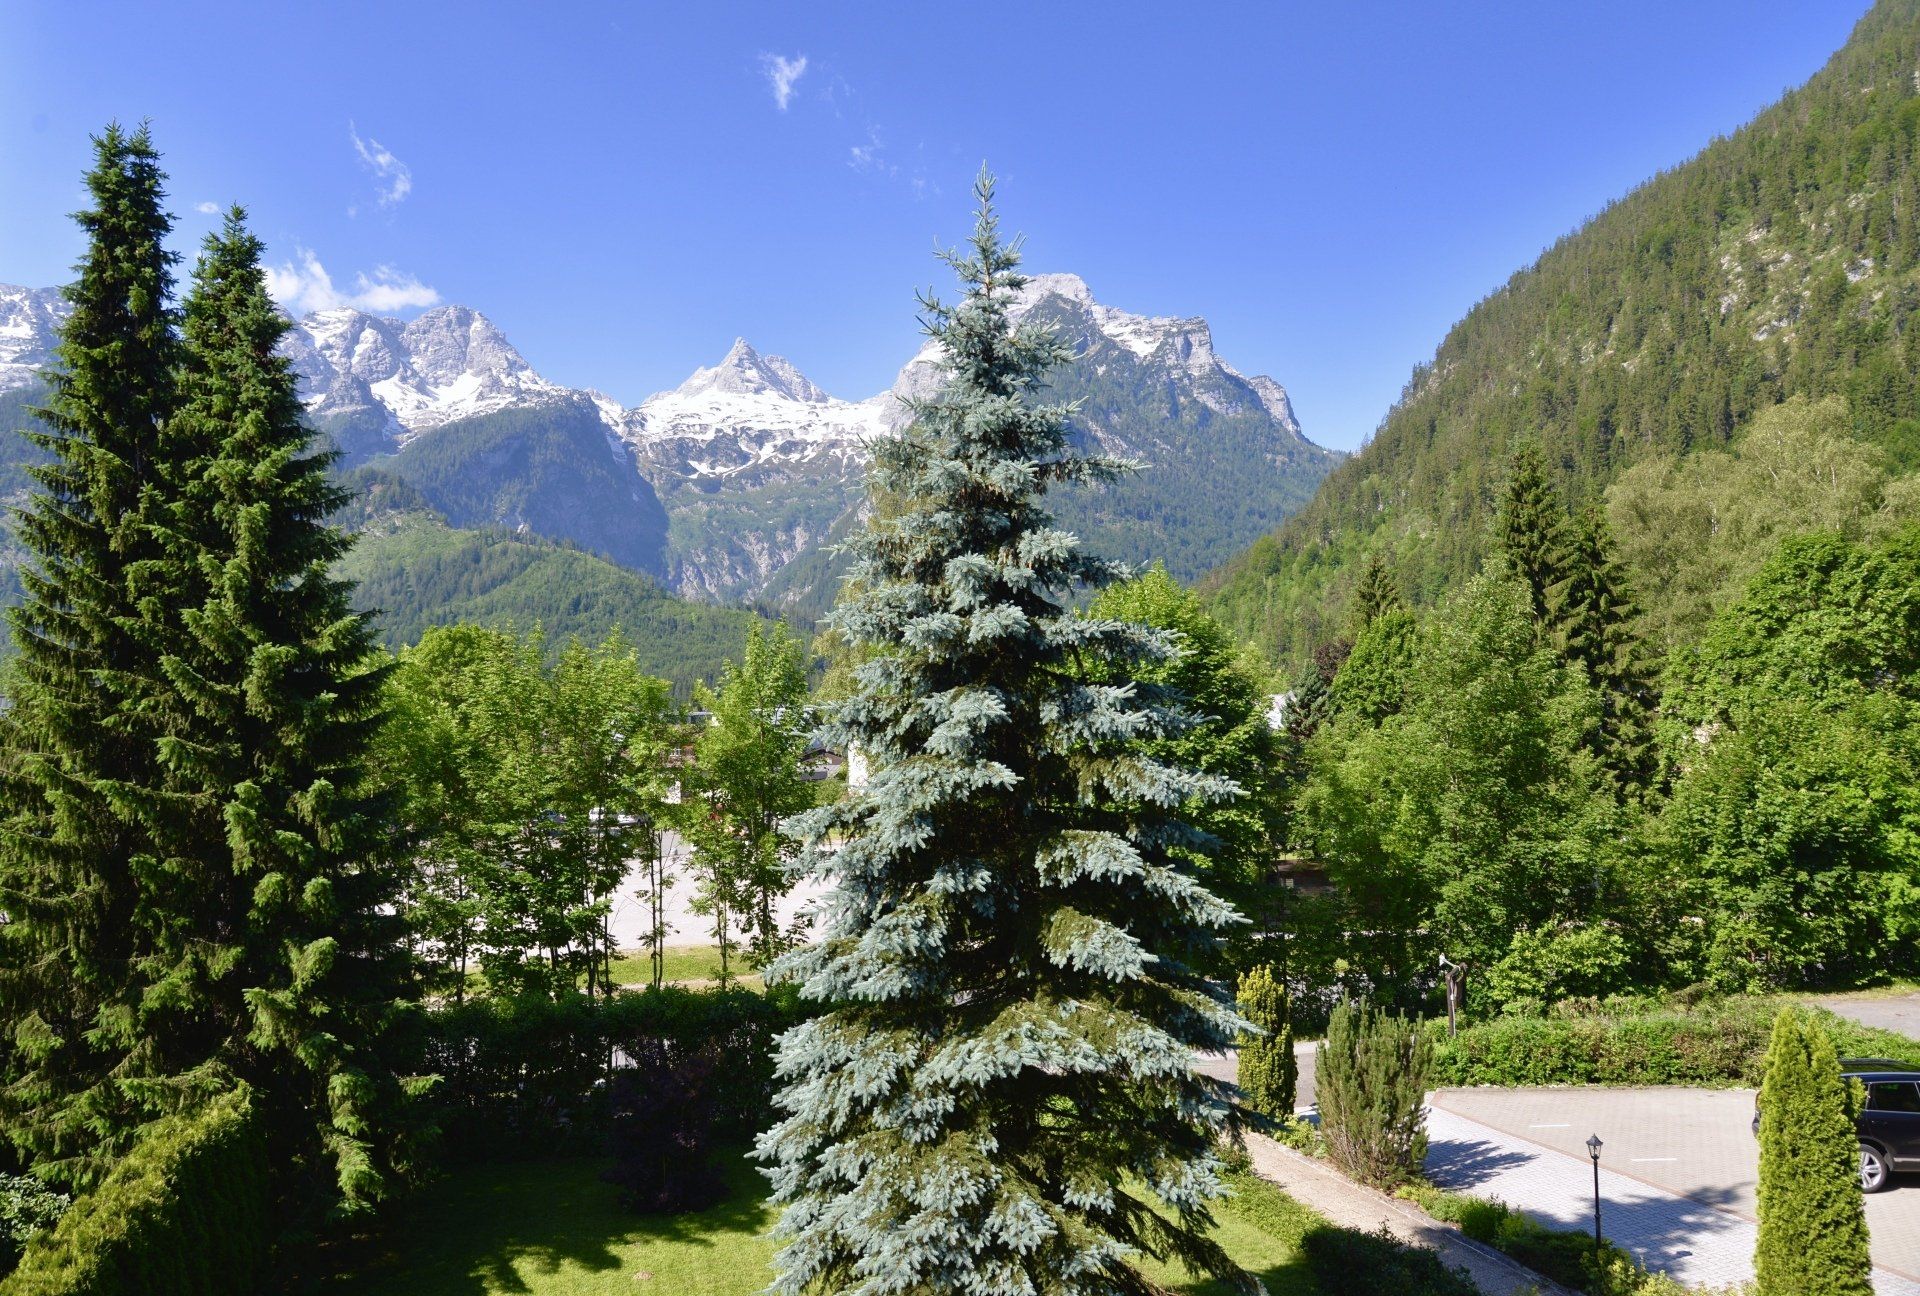 the view from the balconies: a beautiful mountain range with trees in the foreground